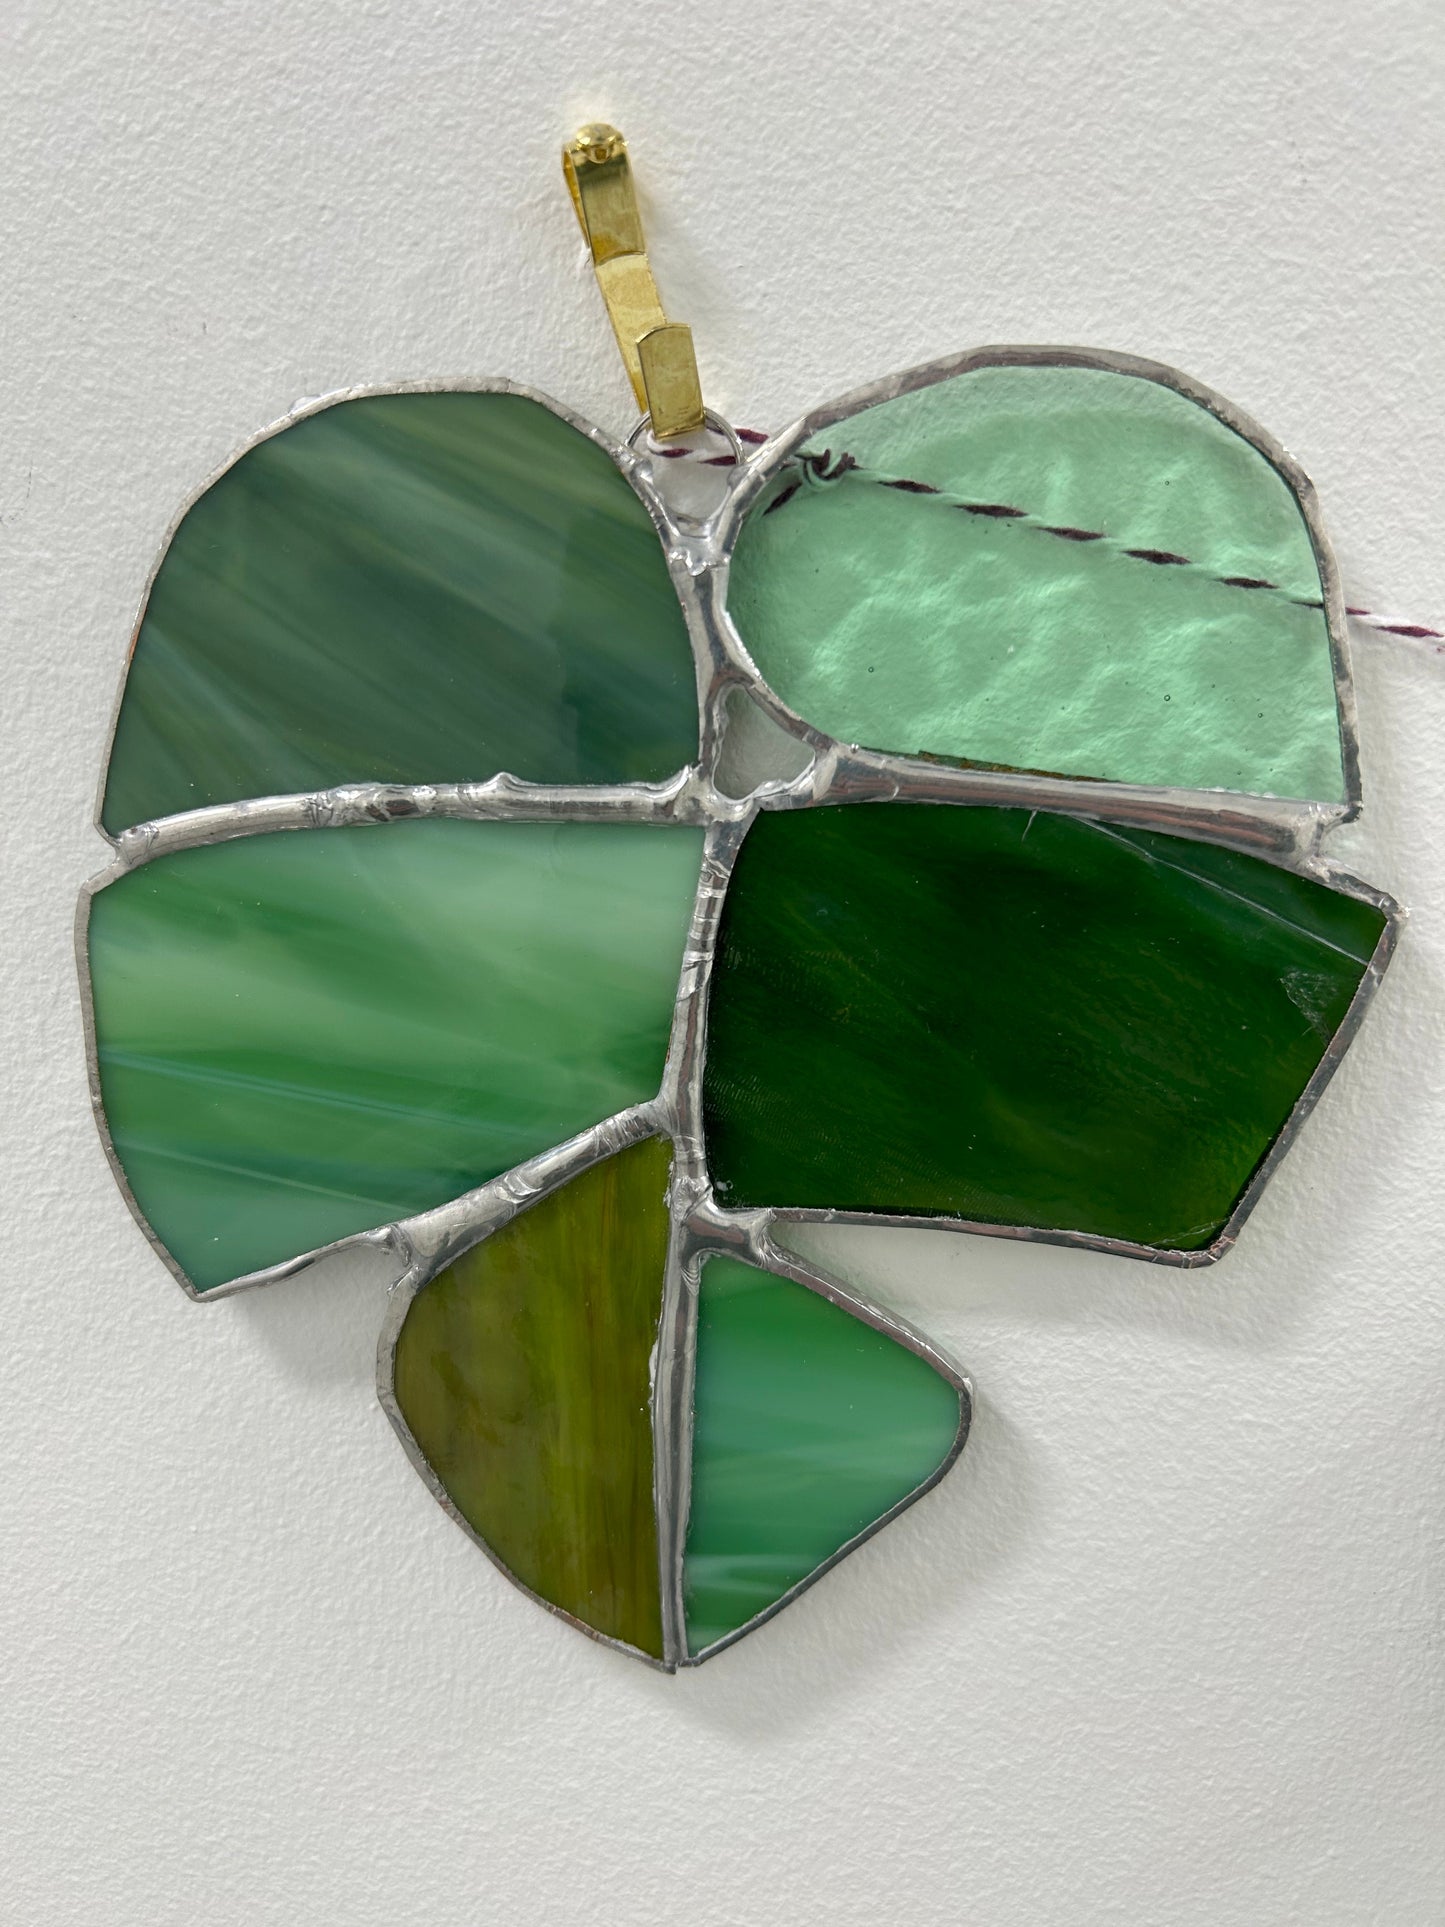 Beginner Stained Glass class, May 9, 11-2:00 pm